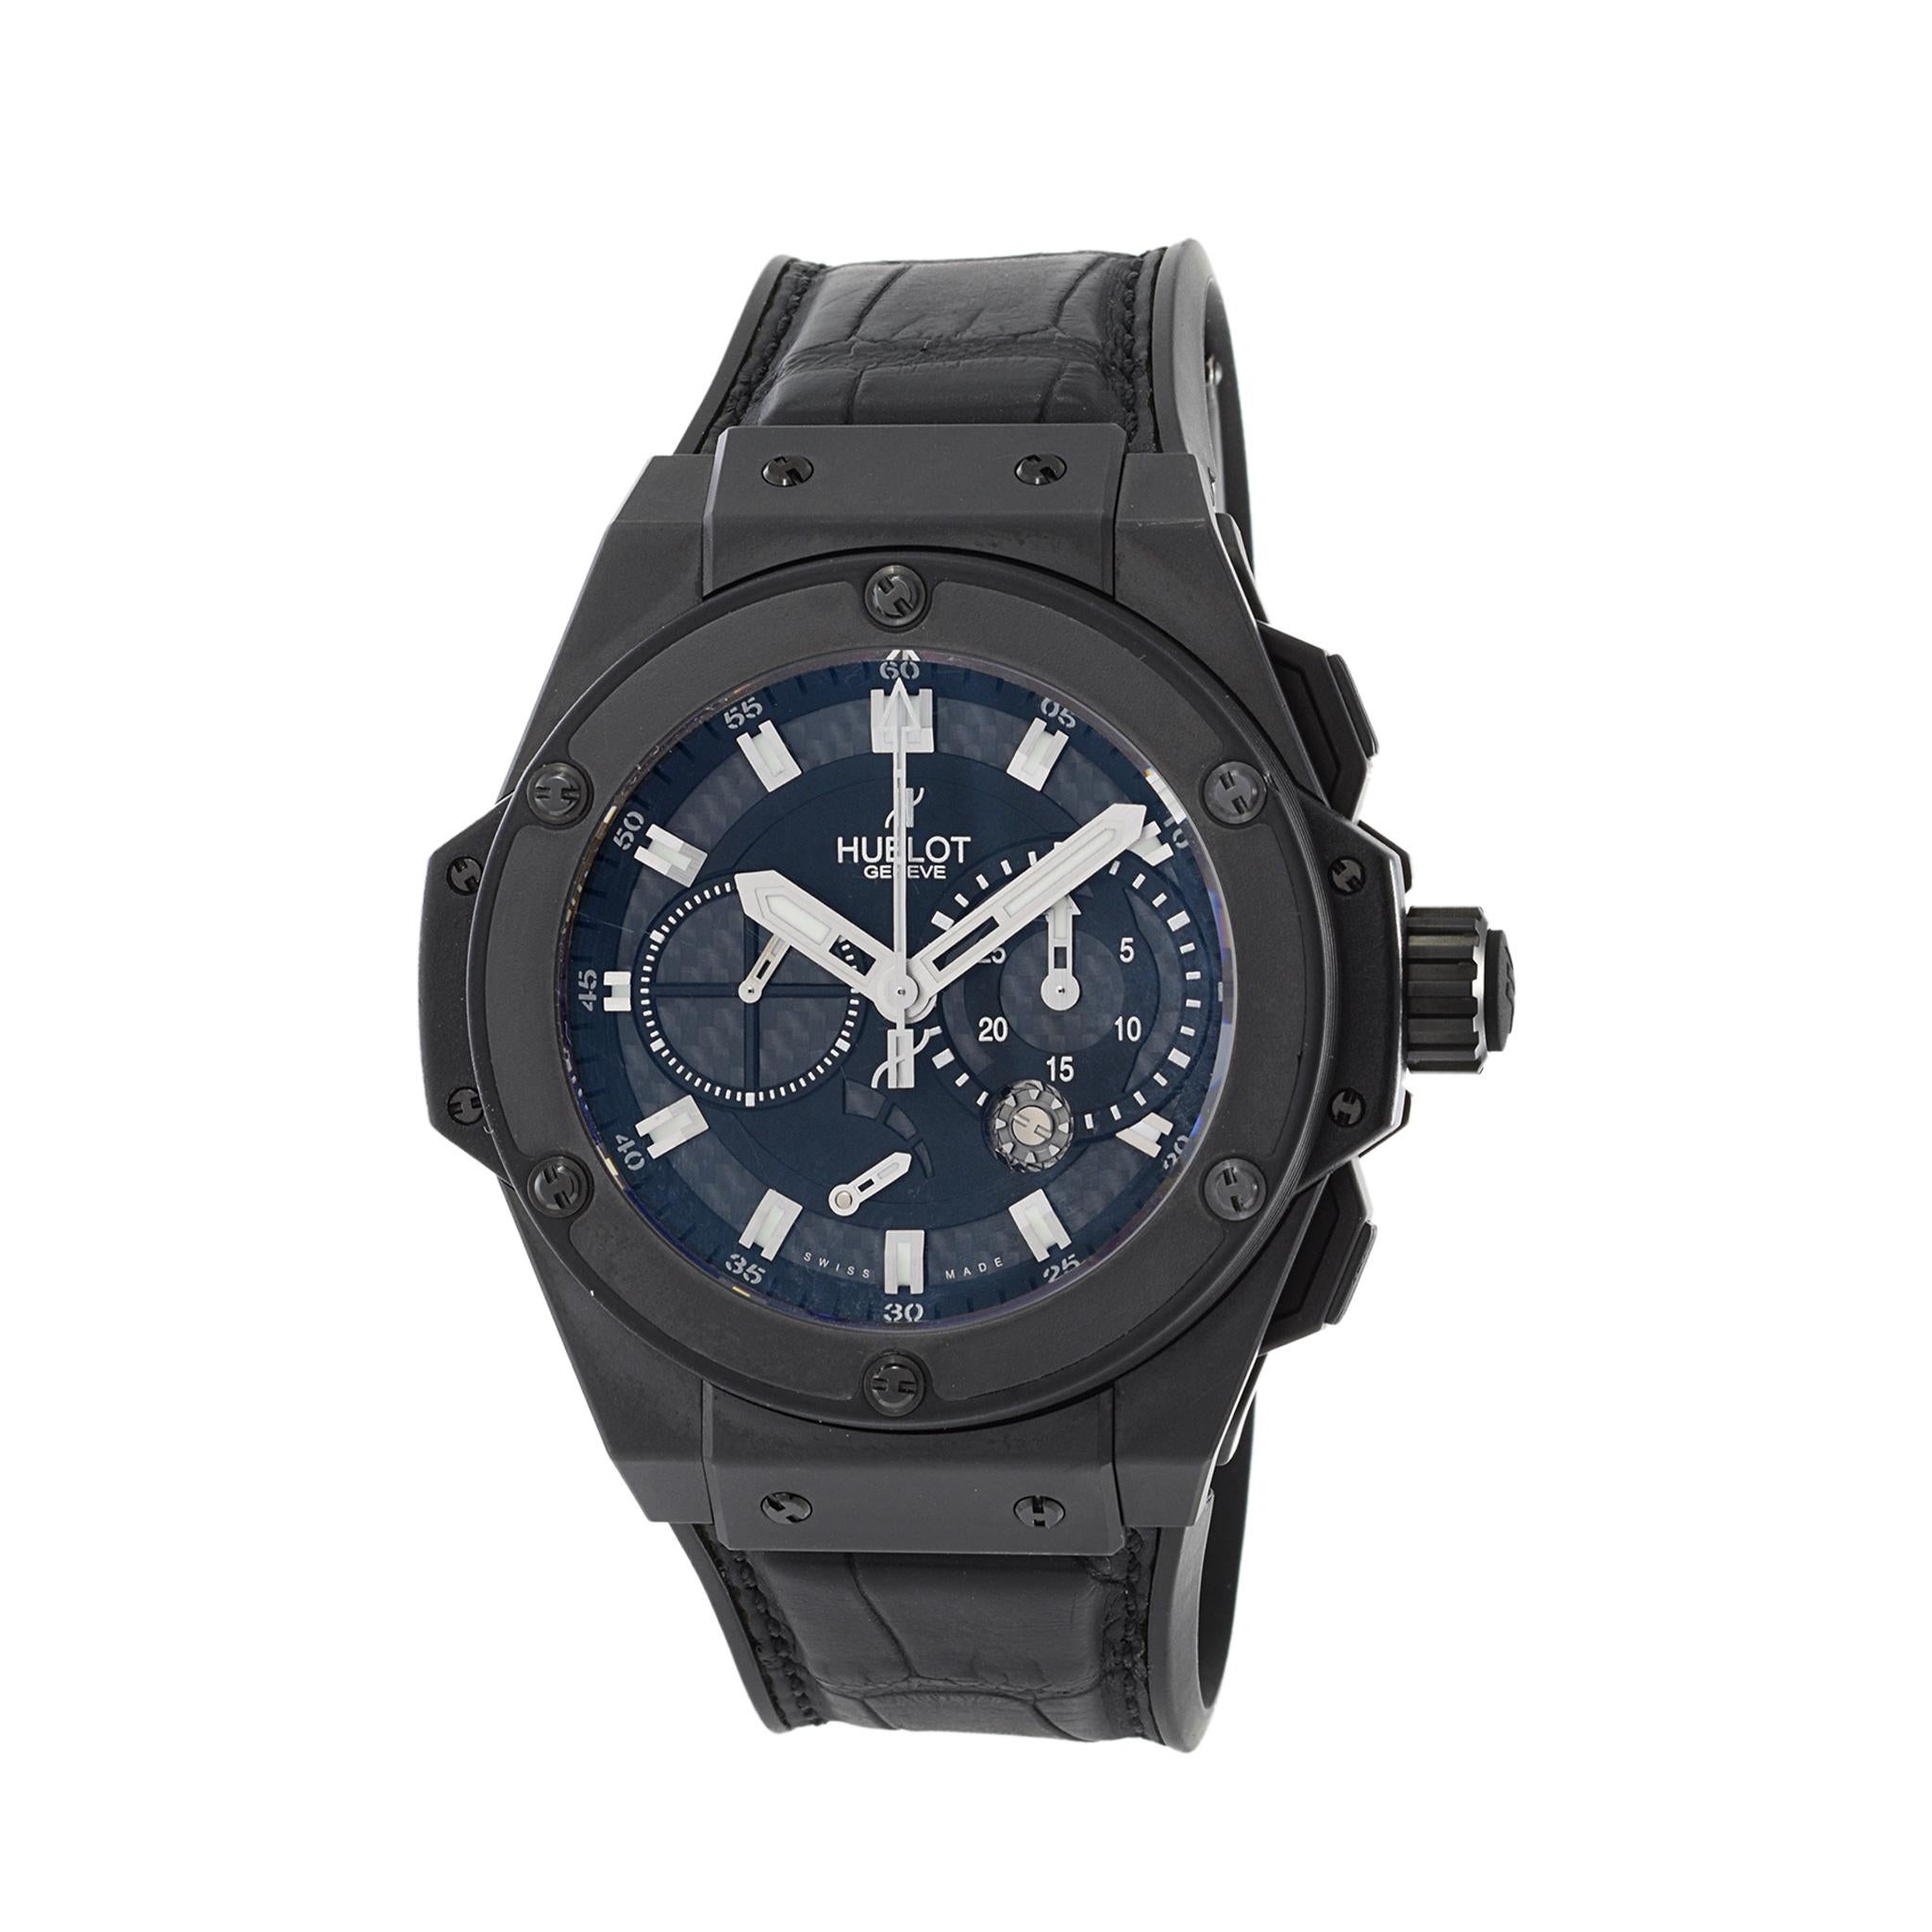 Indulge in sophistication with this Hublot limited edition watch. Crafted with a 48mm black ceramic case, a carbon fiber dial with chronograph functionality, and a high-quality automatic Swiss movement, this exquisite timepiece exudes luxury and